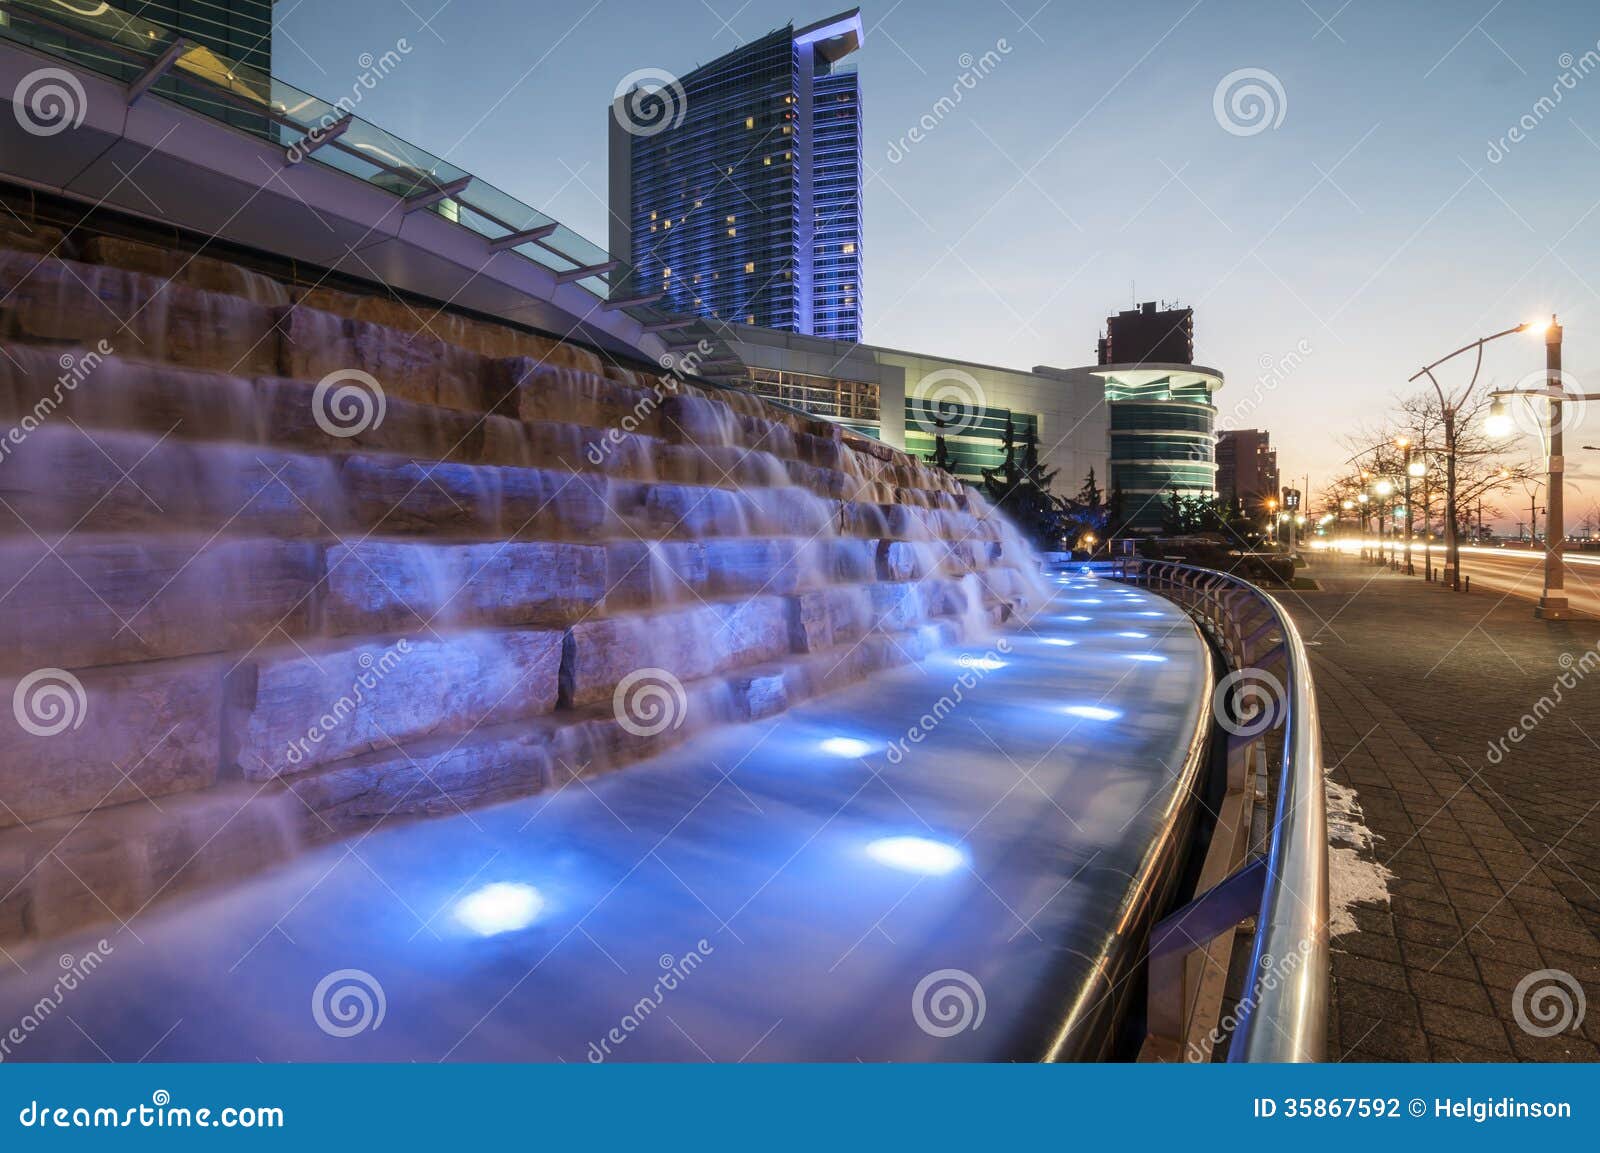 cascading water feature